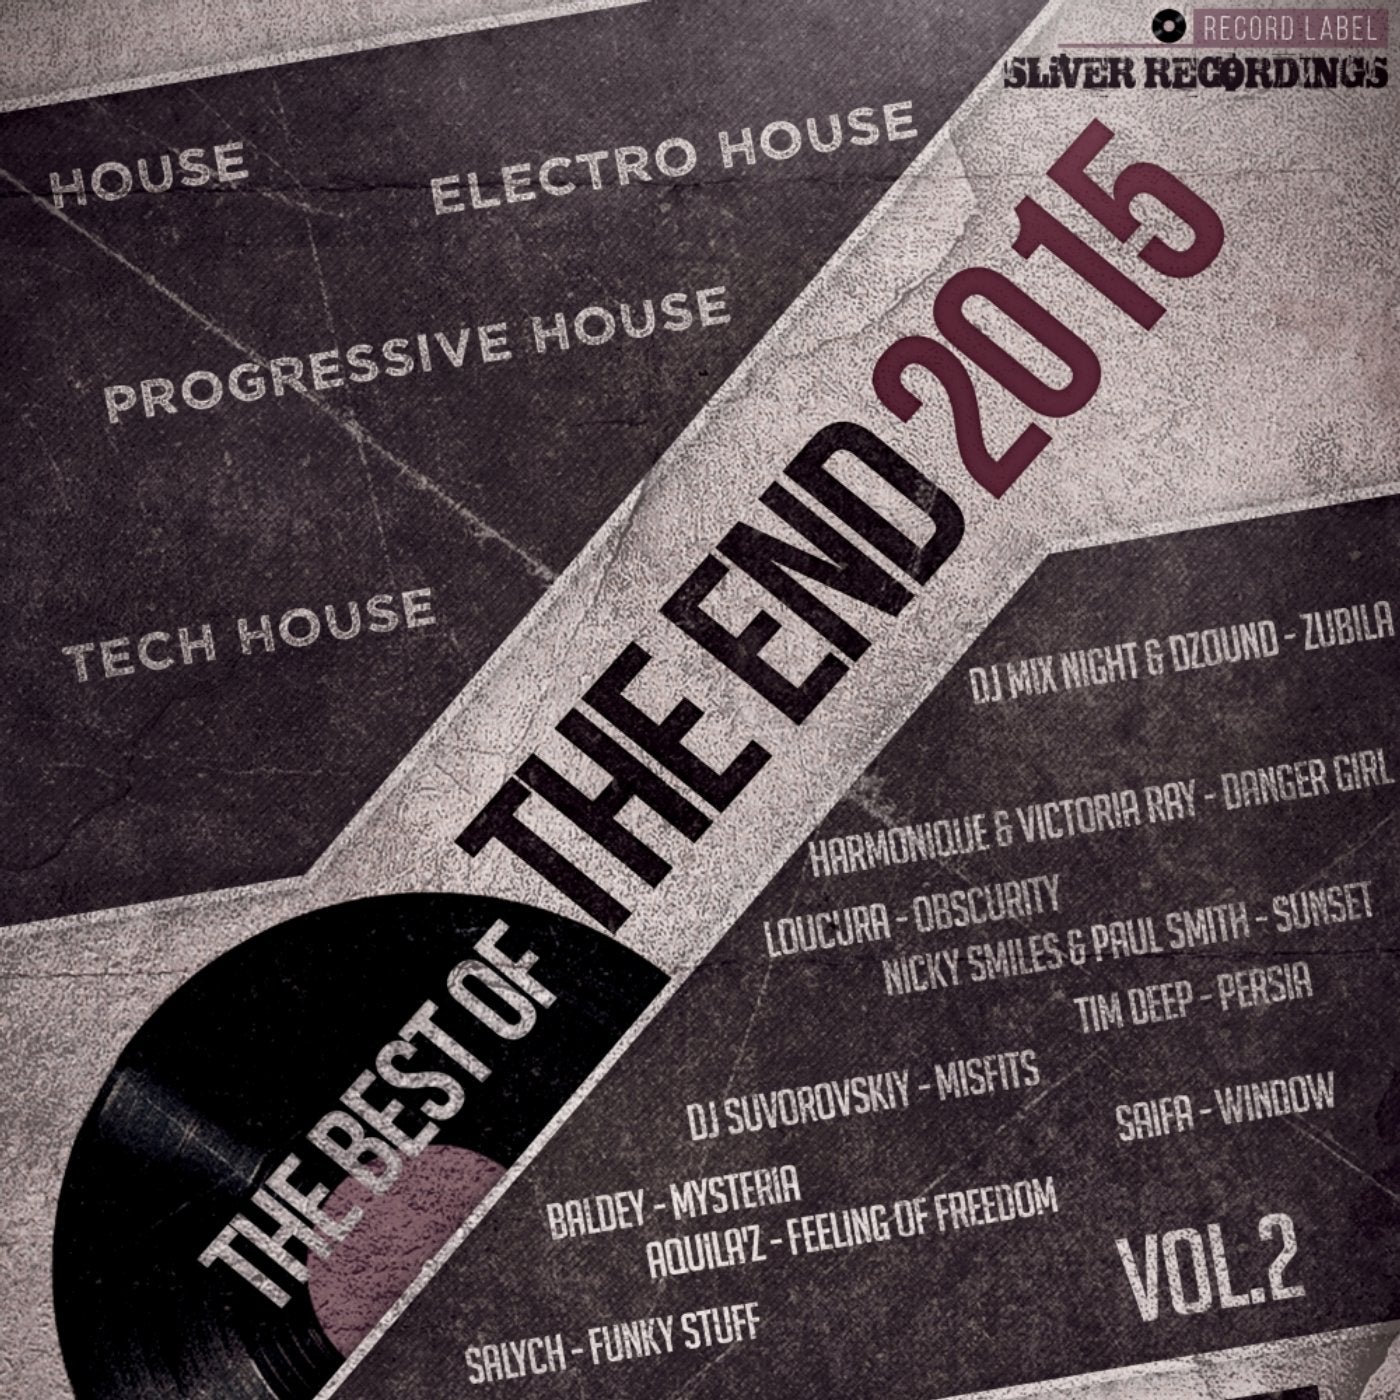 The Best Of The End 2015, Vol. 2